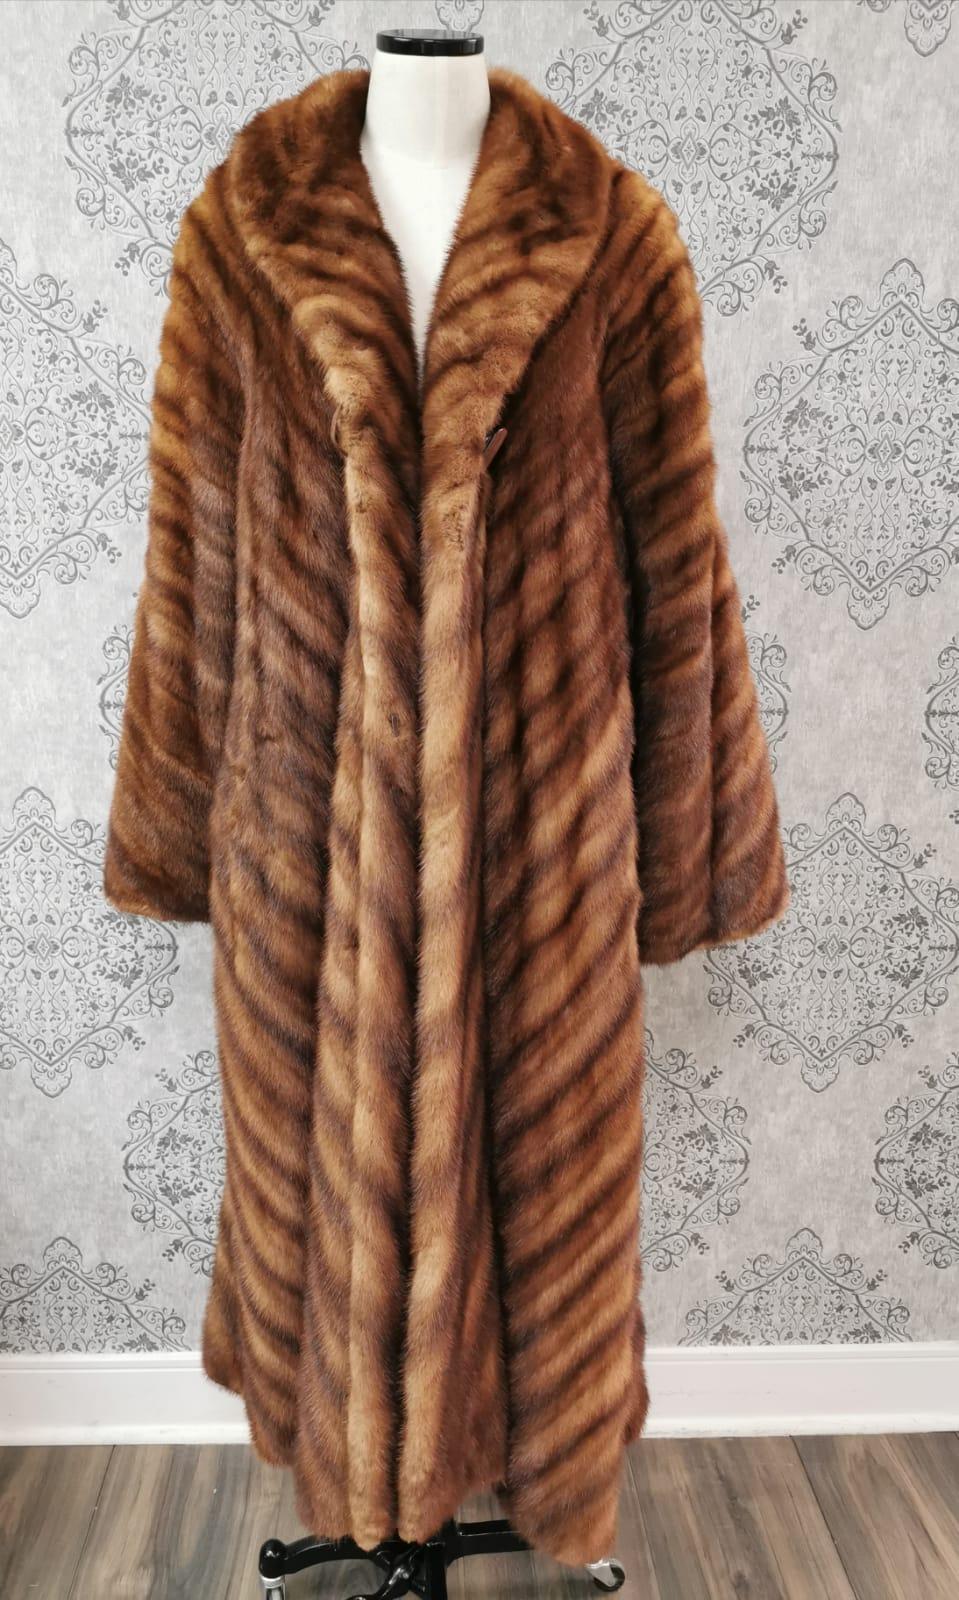 Fendi mink fur Full Length Coat (Size 16 - L) in excellent condition

When it comes to fur, Fendi is the ultimate reference in quality and style. This stunning Fendi coat is a classic with the diagonal design in fur workmanship. It has an elegant